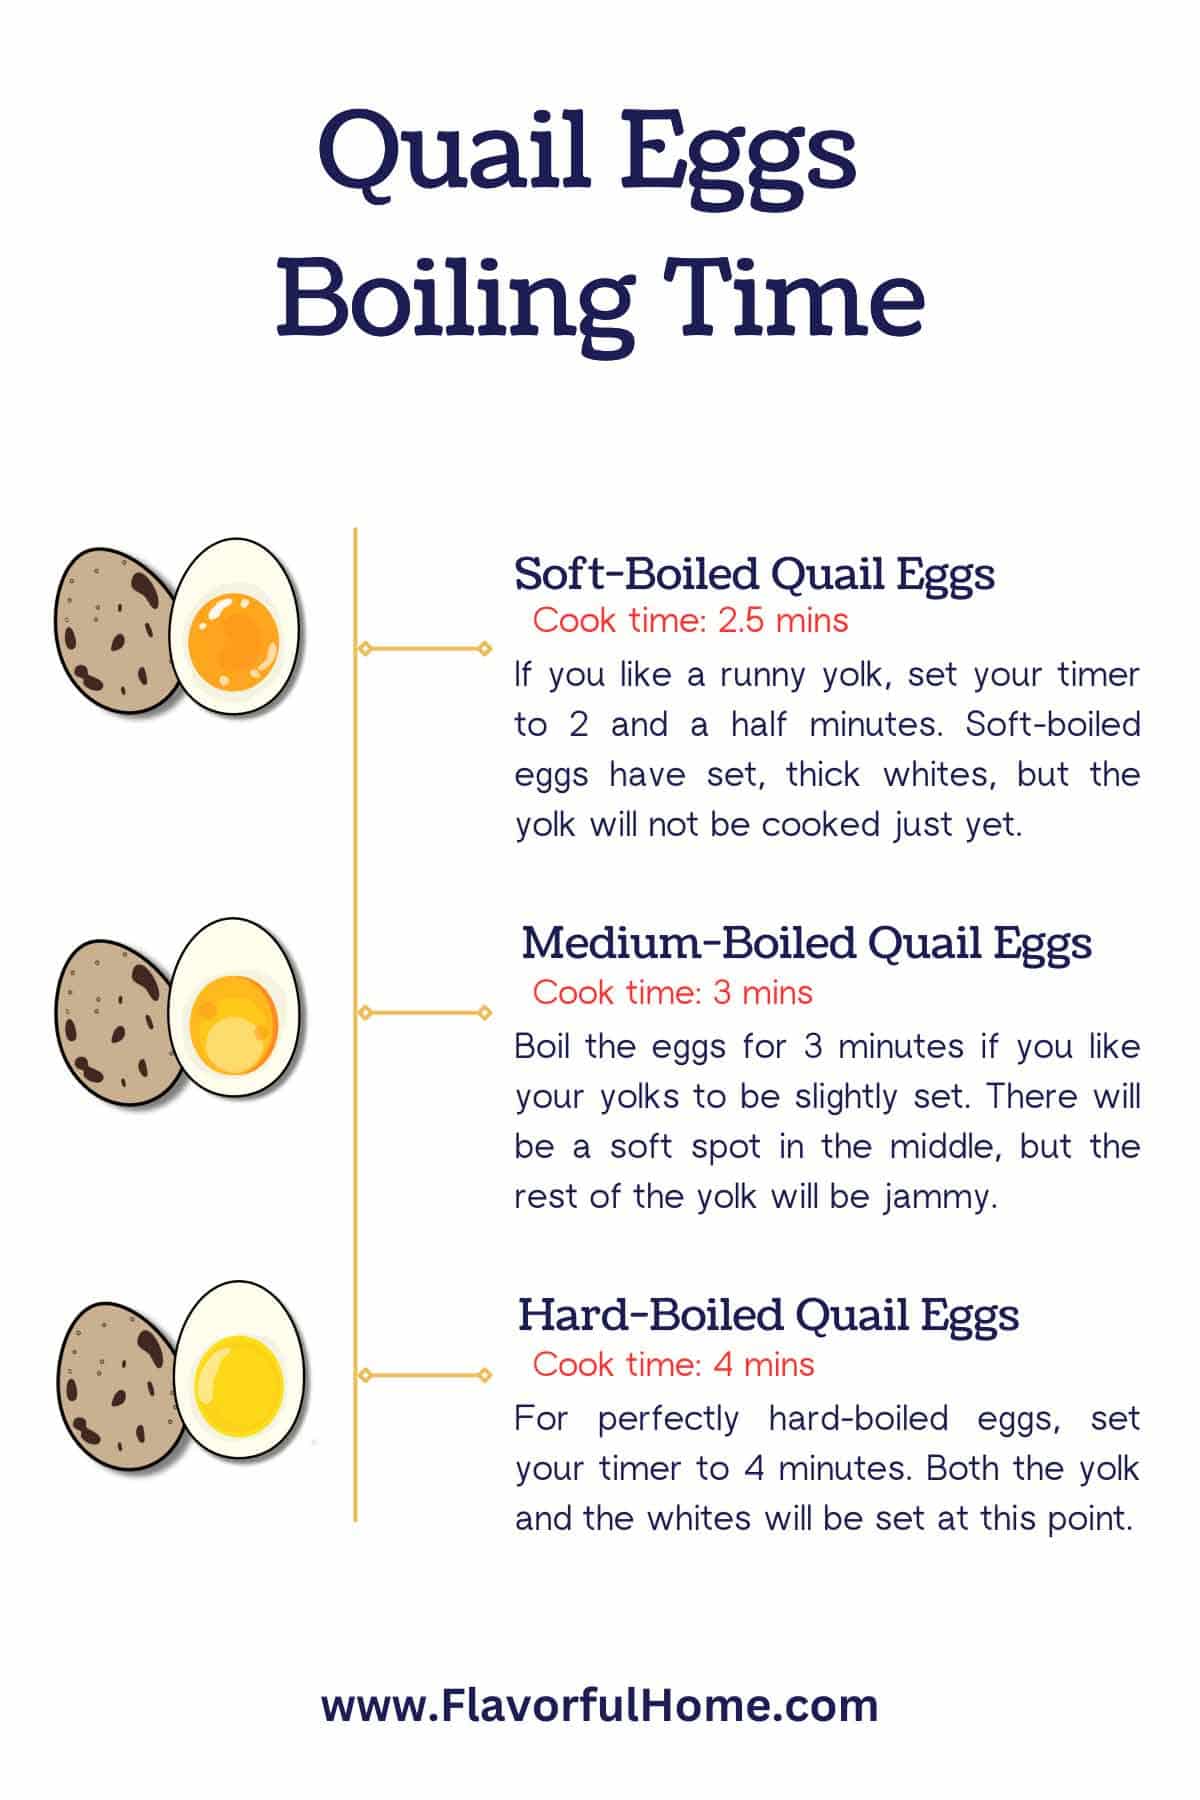 Infographic showing how to boil quail egg to achieve different results.